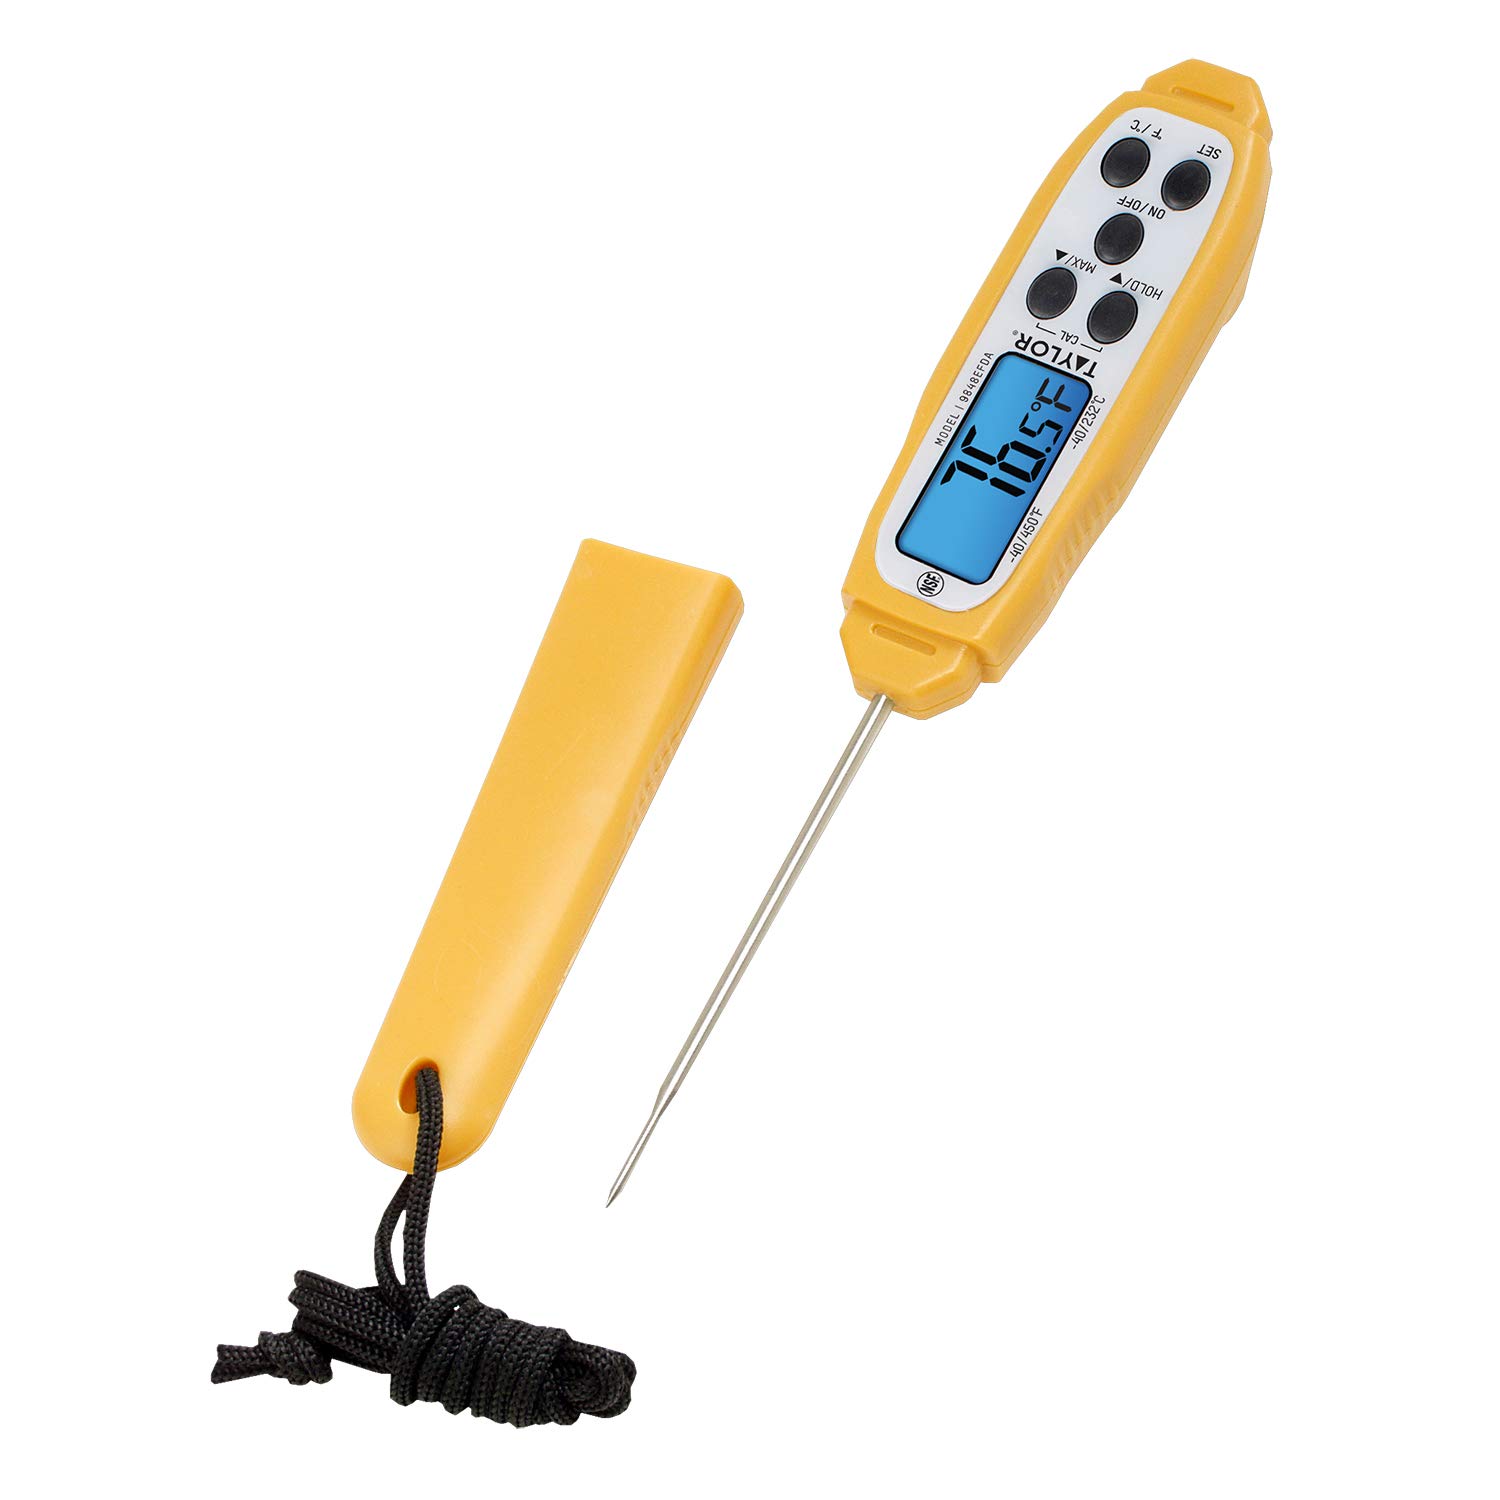 Taylor Waterproof Digital Thermometer Yellow